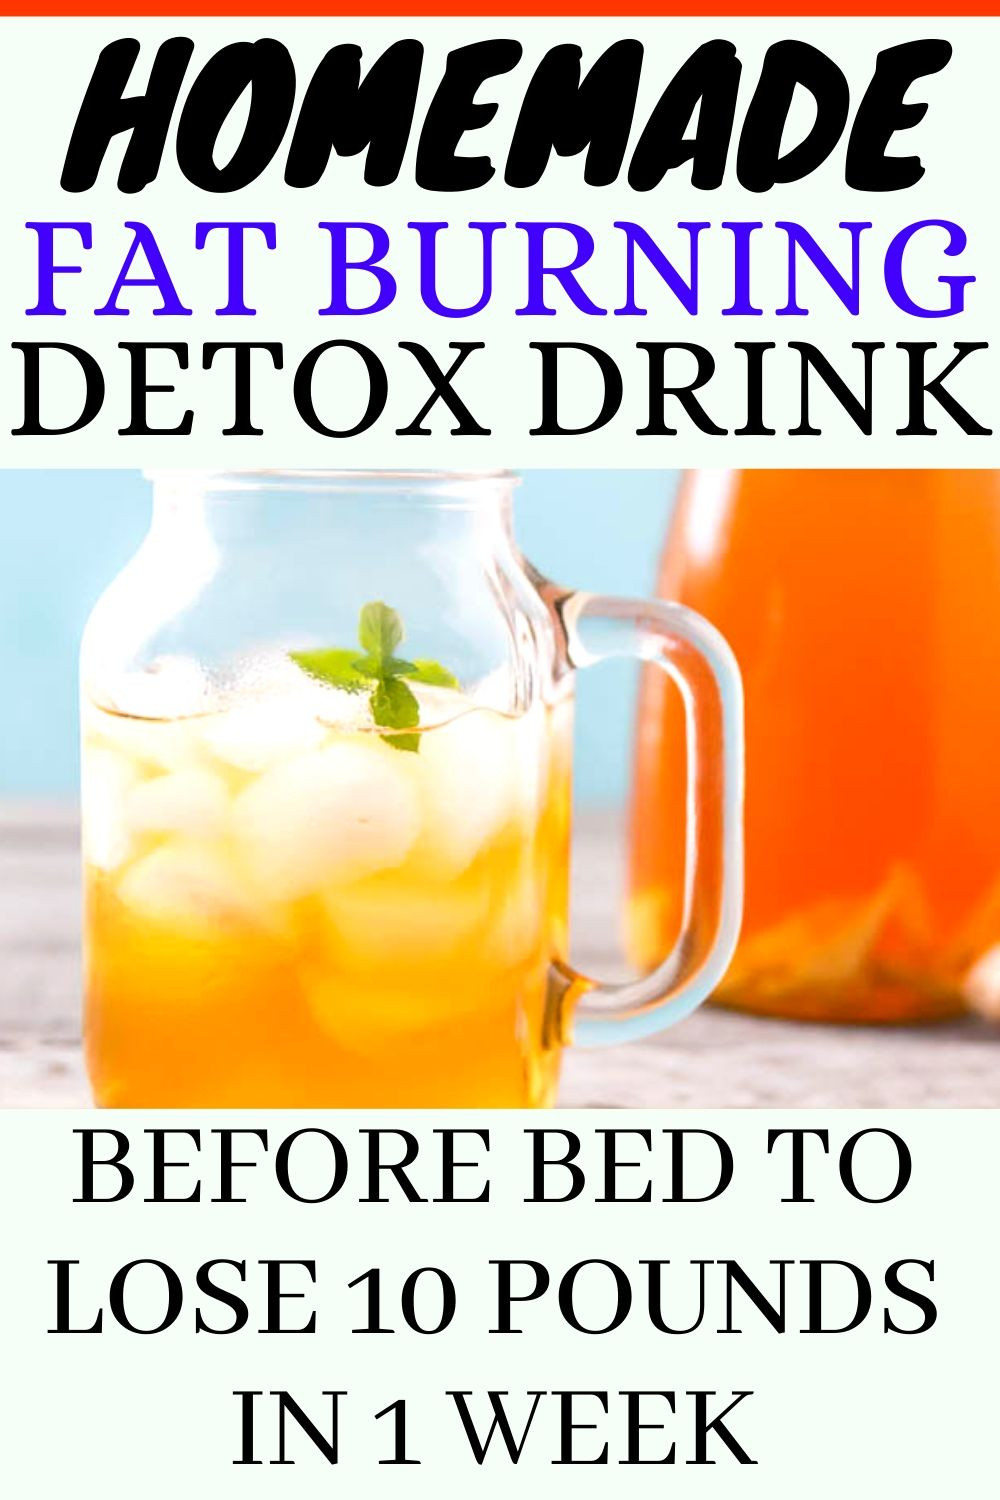 Fat Burning Foods Before Bed
 Fat Burning Detox Drink Before Bed To Lose 10 Pounds In 1